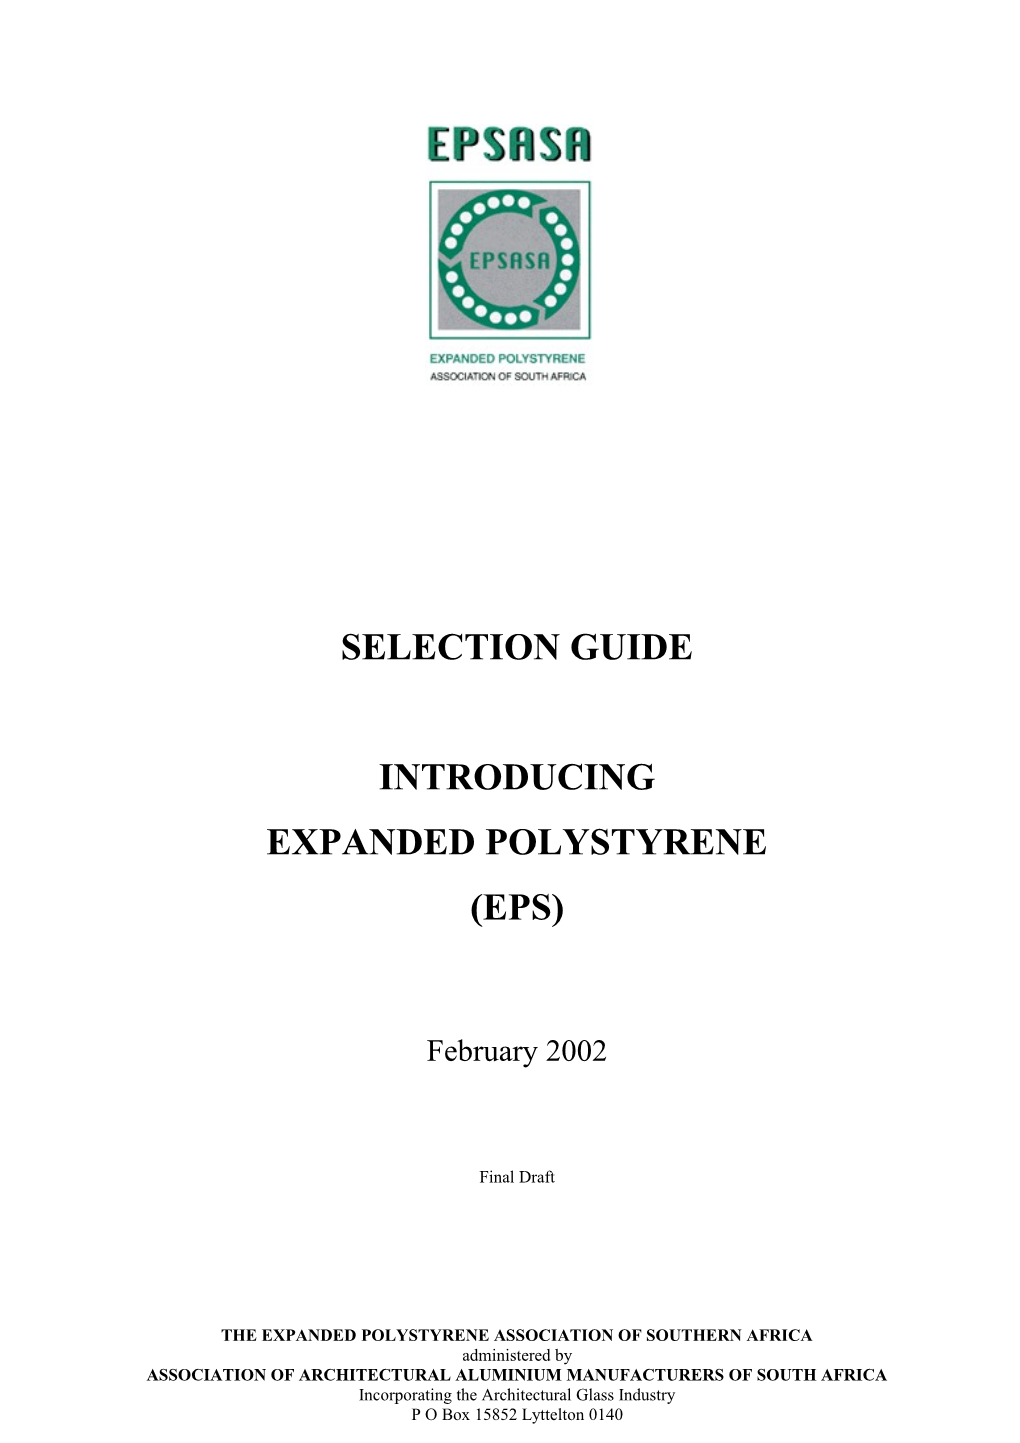 The Expanded Polystyrene Association of Southern Africa s1